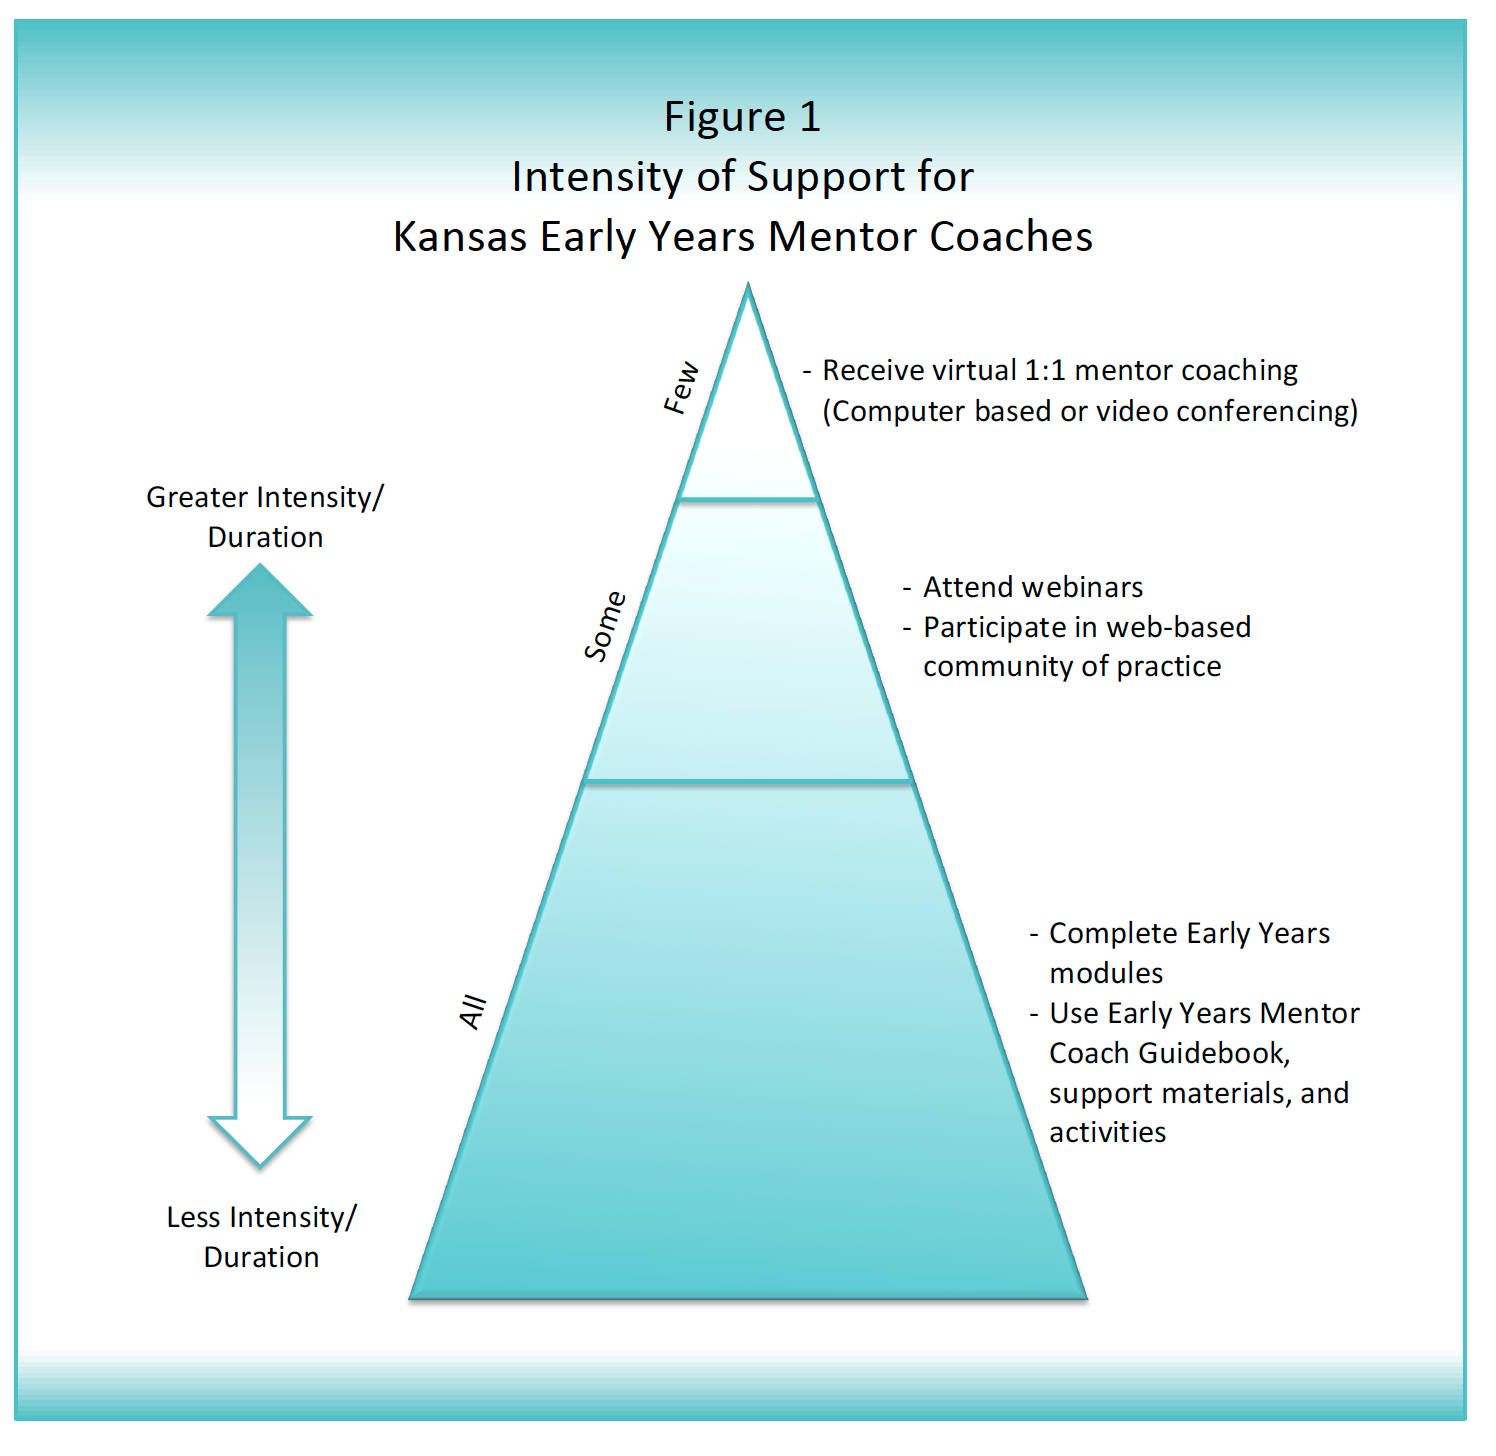 "Figure 1 illustrates the professional development model for Kansas Early Years mentor coaches."